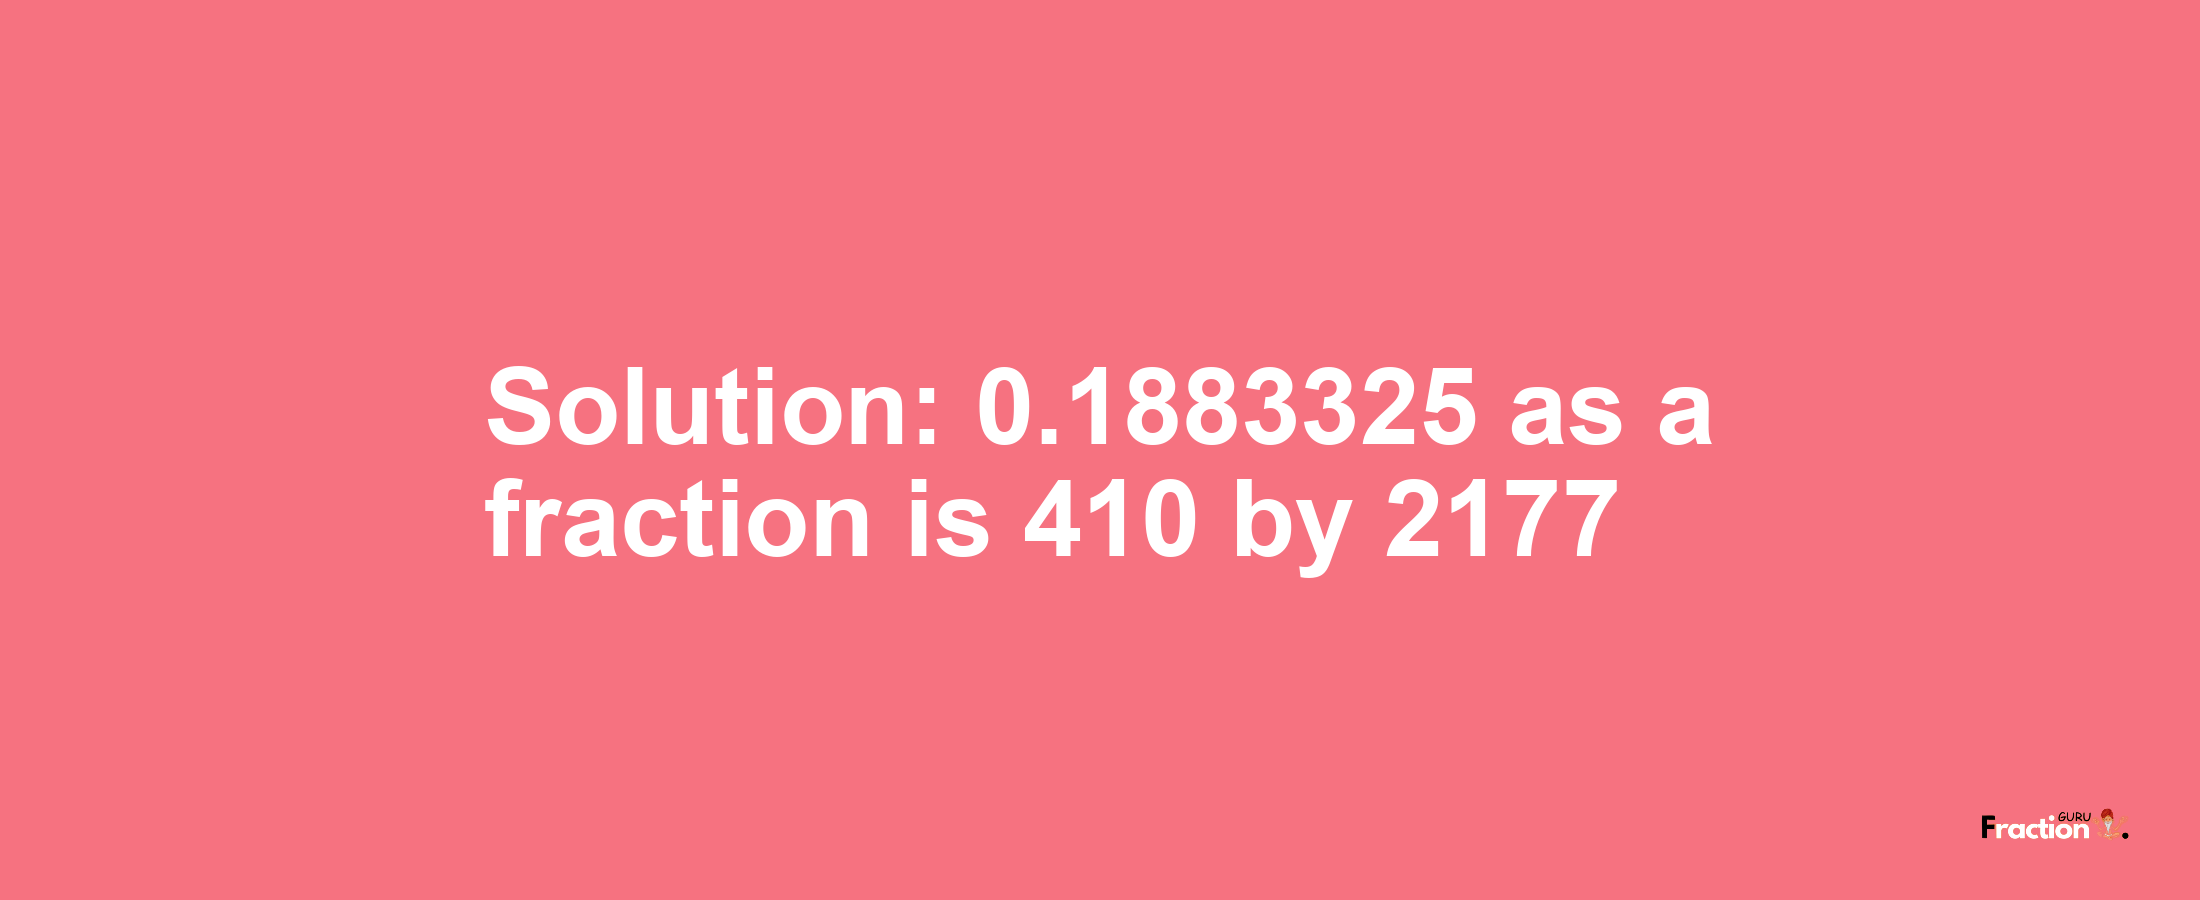 Solution:0.1883325 as a fraction is 410/2177